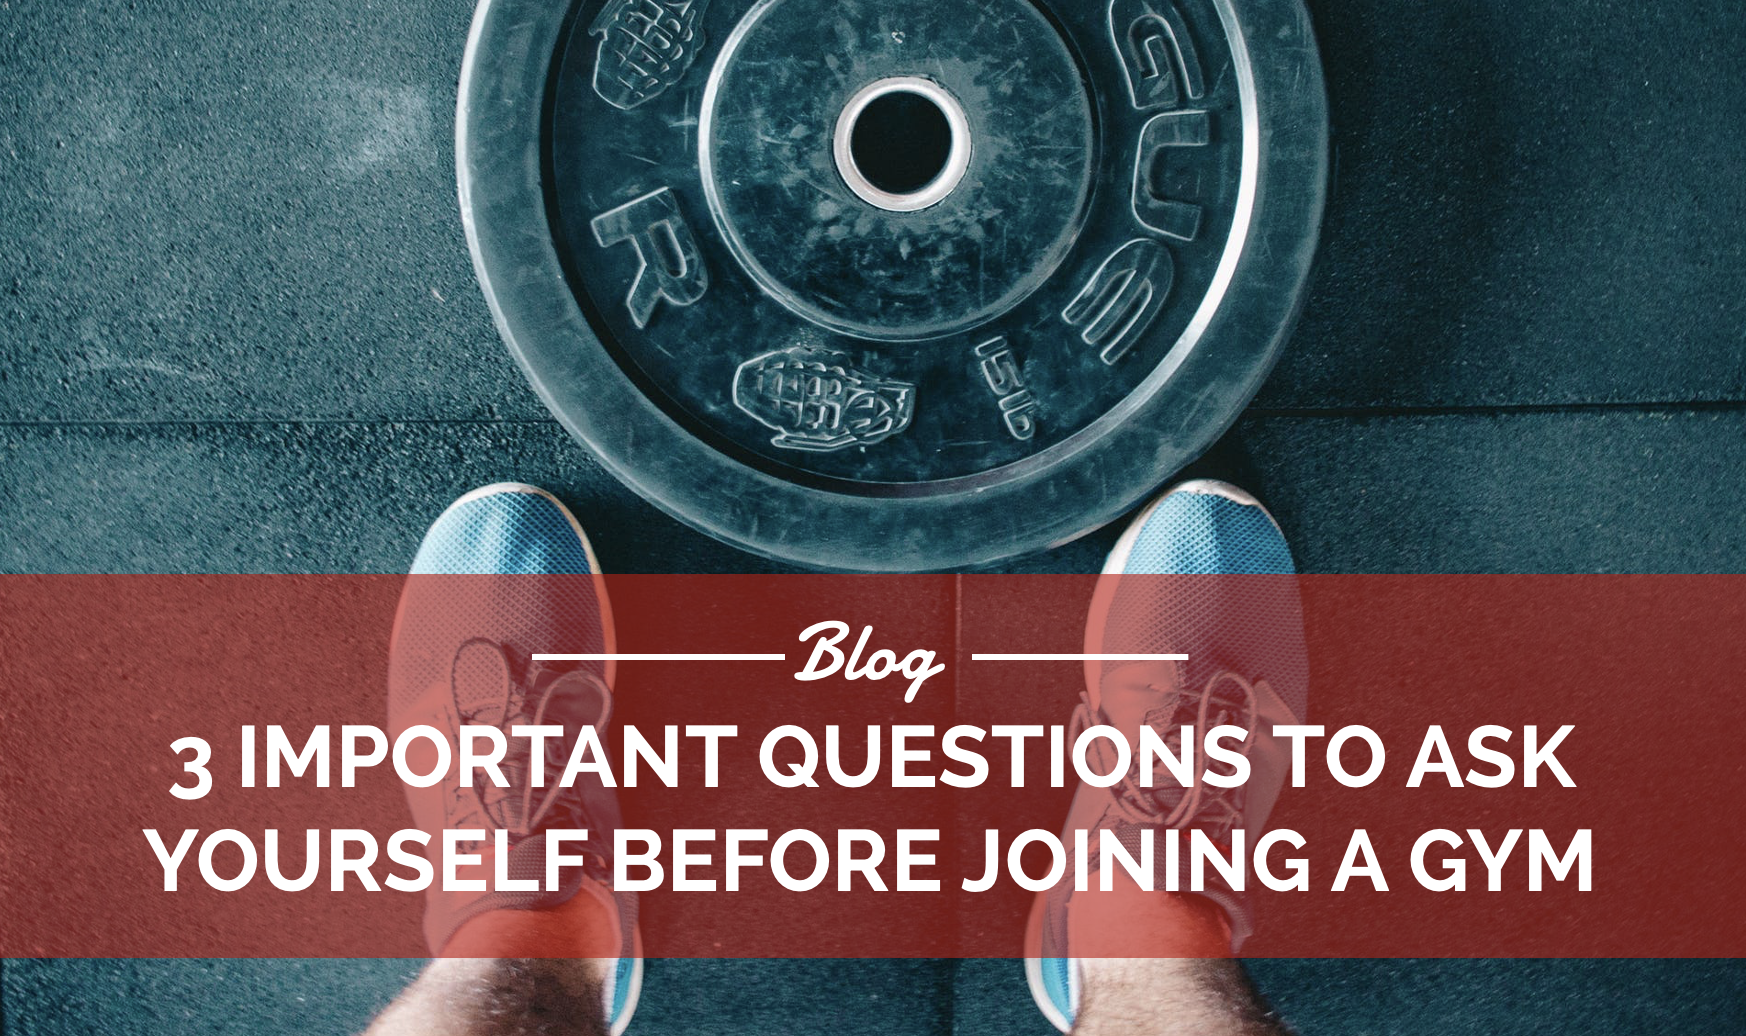 The Pt Center: 3 important questions to ask yourself before joining a gym